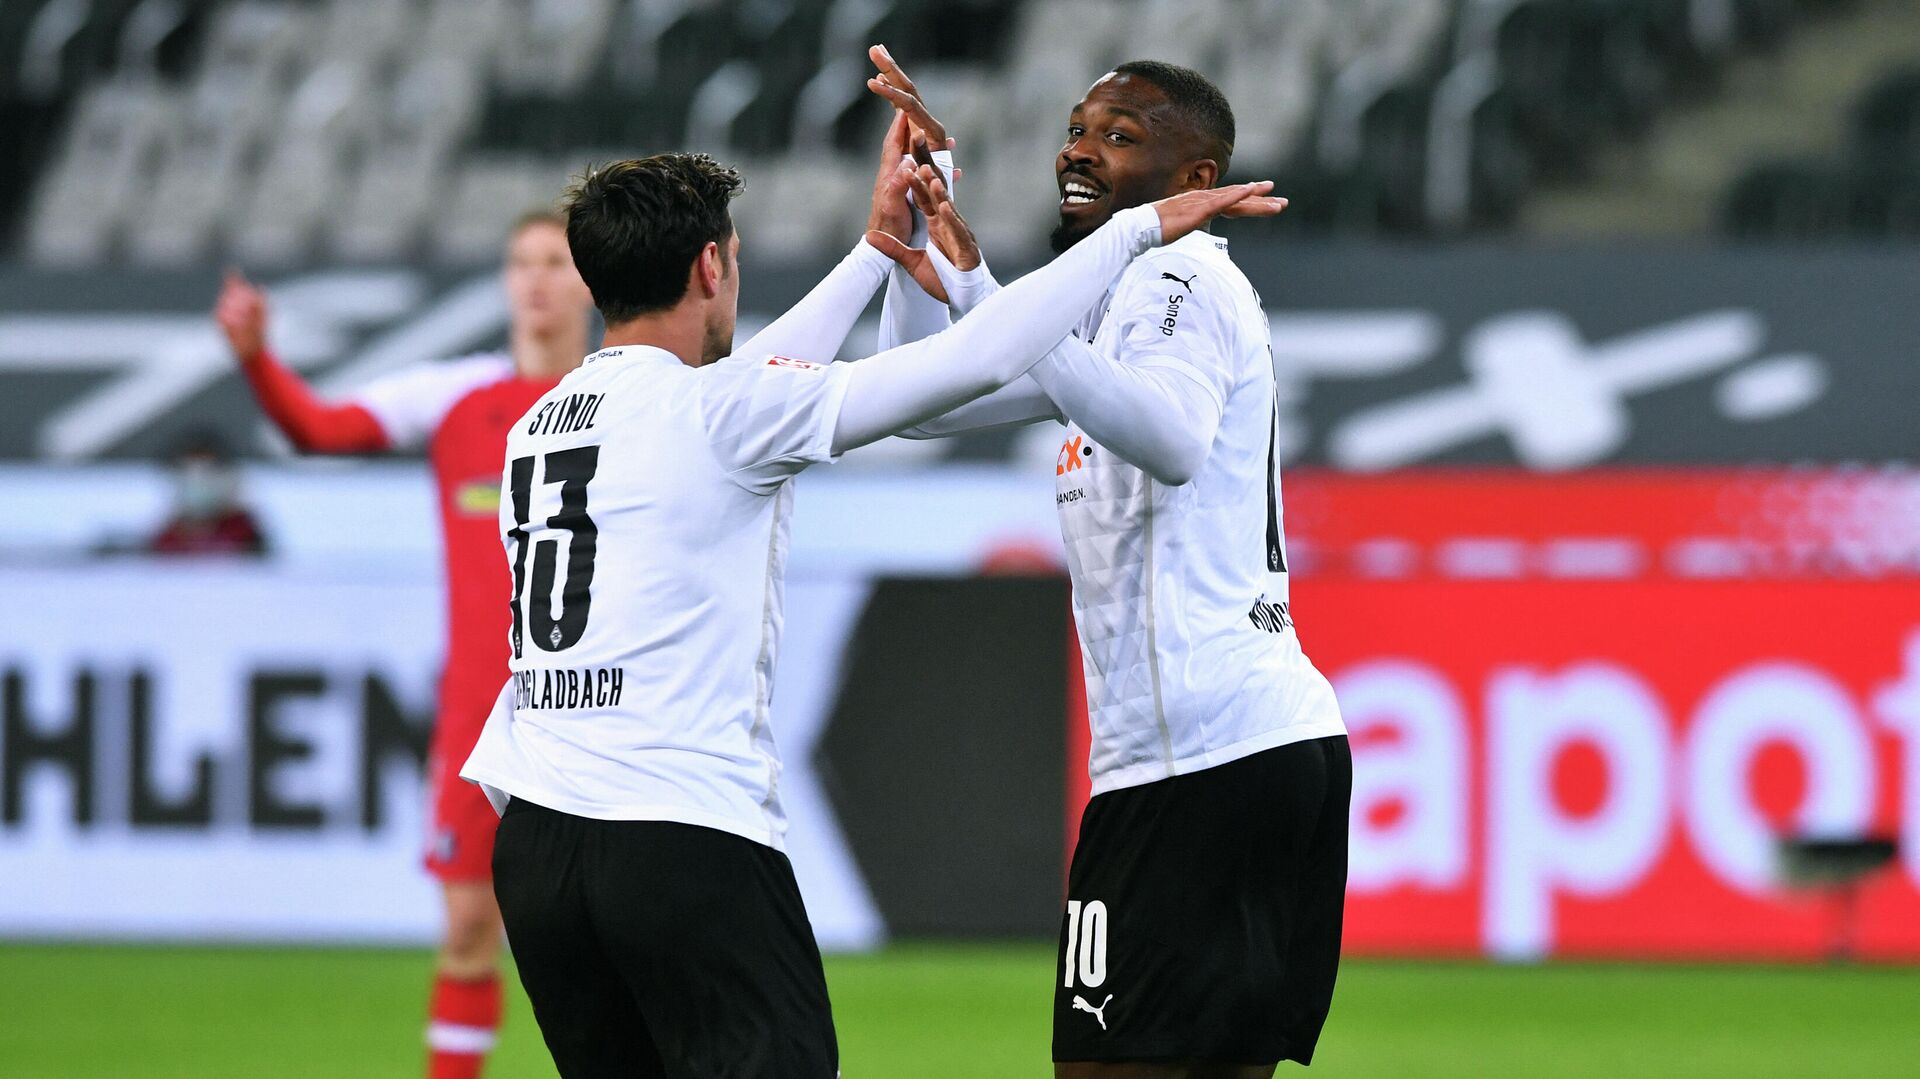 Moenchengladbach's French forward Marcus Thuram celebrates after scoring together with his teammates Moenchengladbach's German forward Lars Stindl (L) during the German first division Bundesliga football match between Borussia Moenchengladbach and SC Freiburg in Moenchengladbach, western Germany, on April 3, 2021. (Photo by UWE KRAFT / AFP) / DFL REGULATIONS PROHIBIT ANY USE OF PHOTOGRAPHS AS IMAGE SEQUENCES AND/OR QUASI-VIDEO - РИА Новости, 1920, 03.04.2021